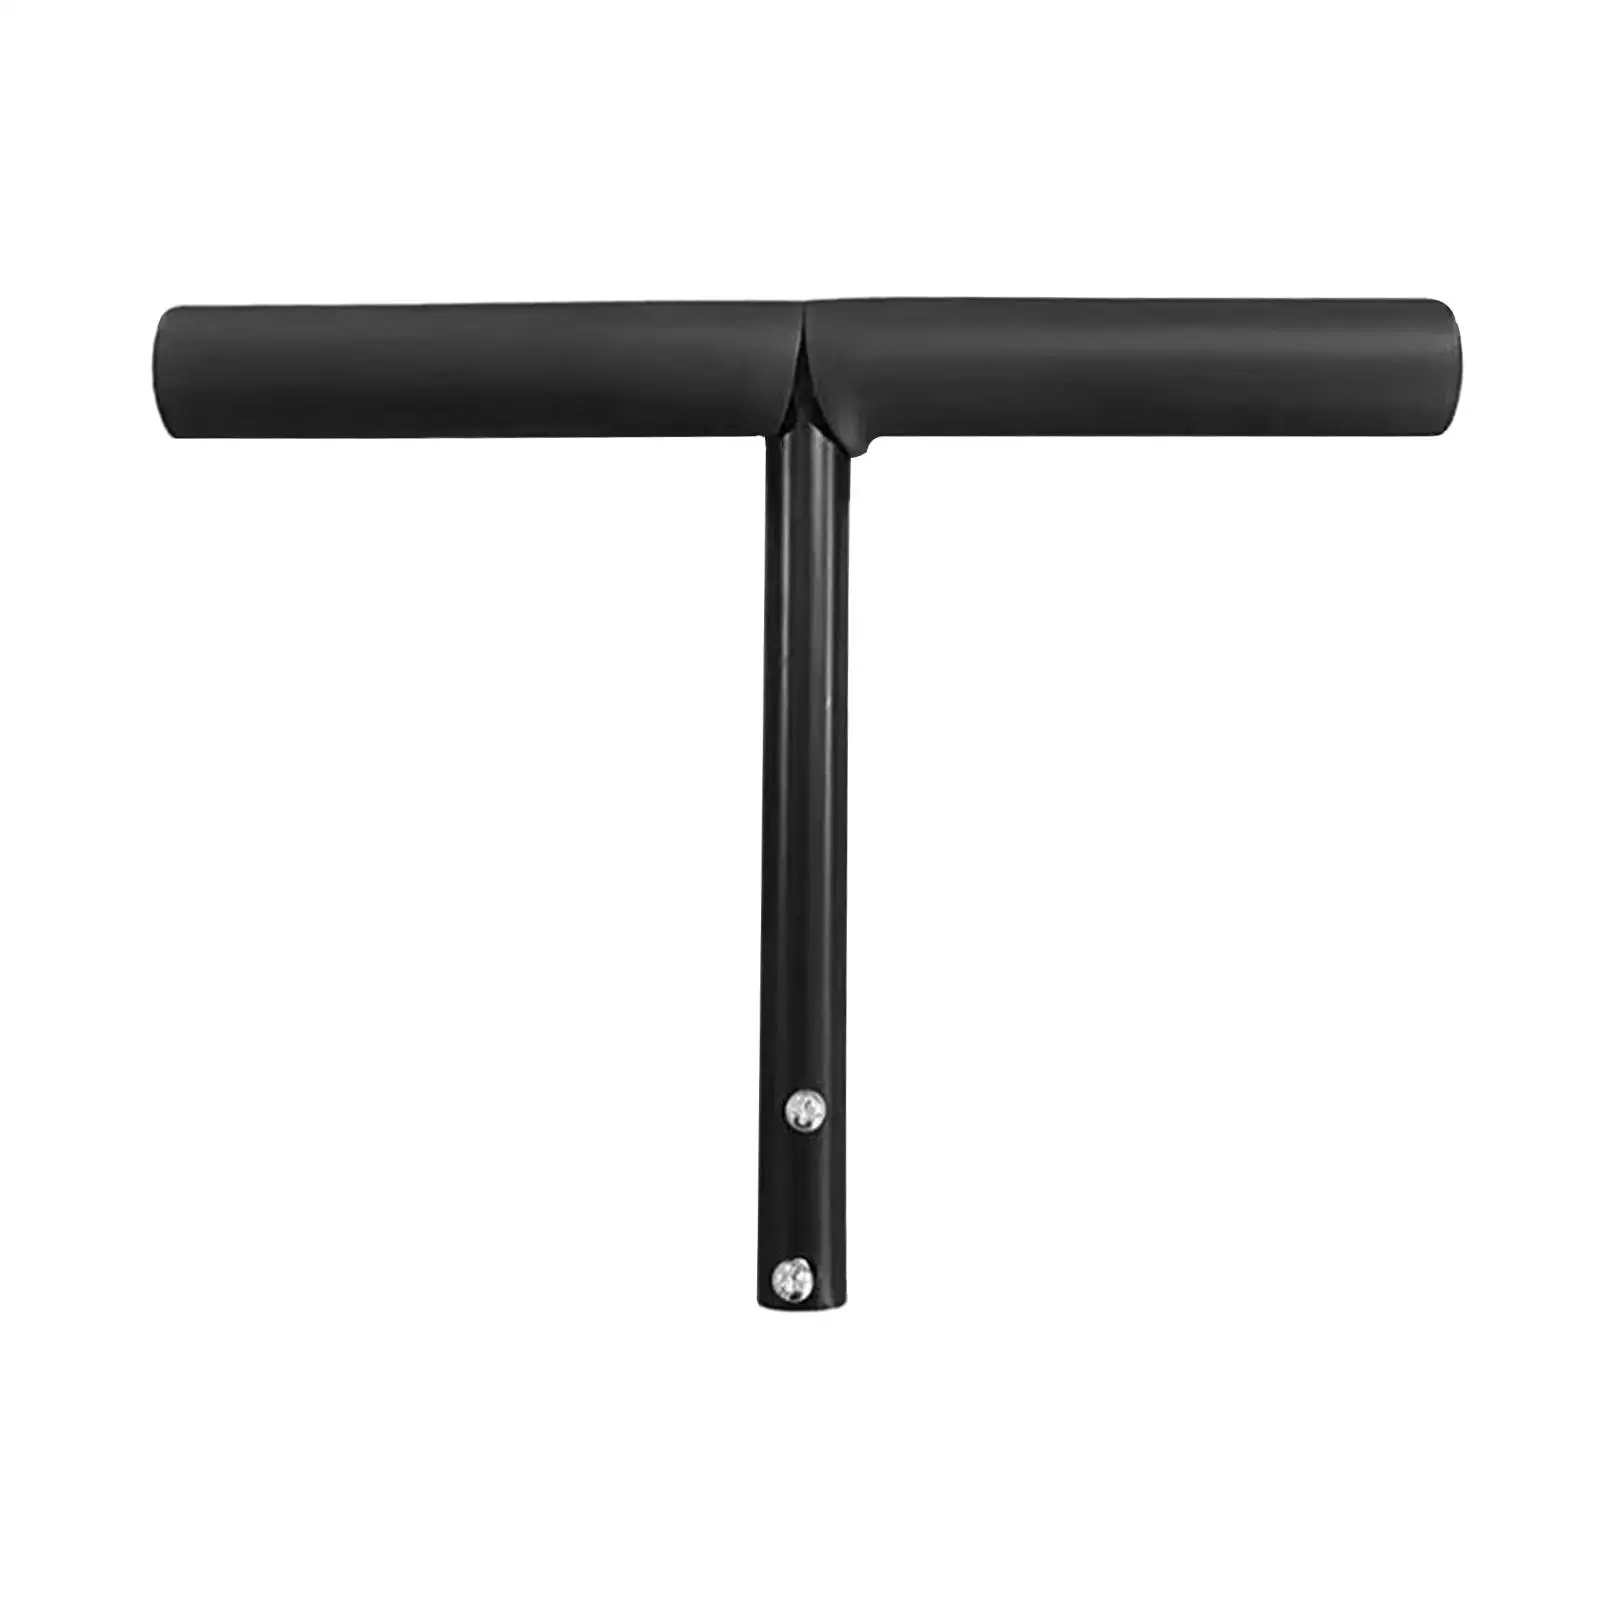 T Shaped Push Handle Bar Easy to Install Sturdy Practical Replacement Baby Bike Accessory Durable for Home Travel Outdoor